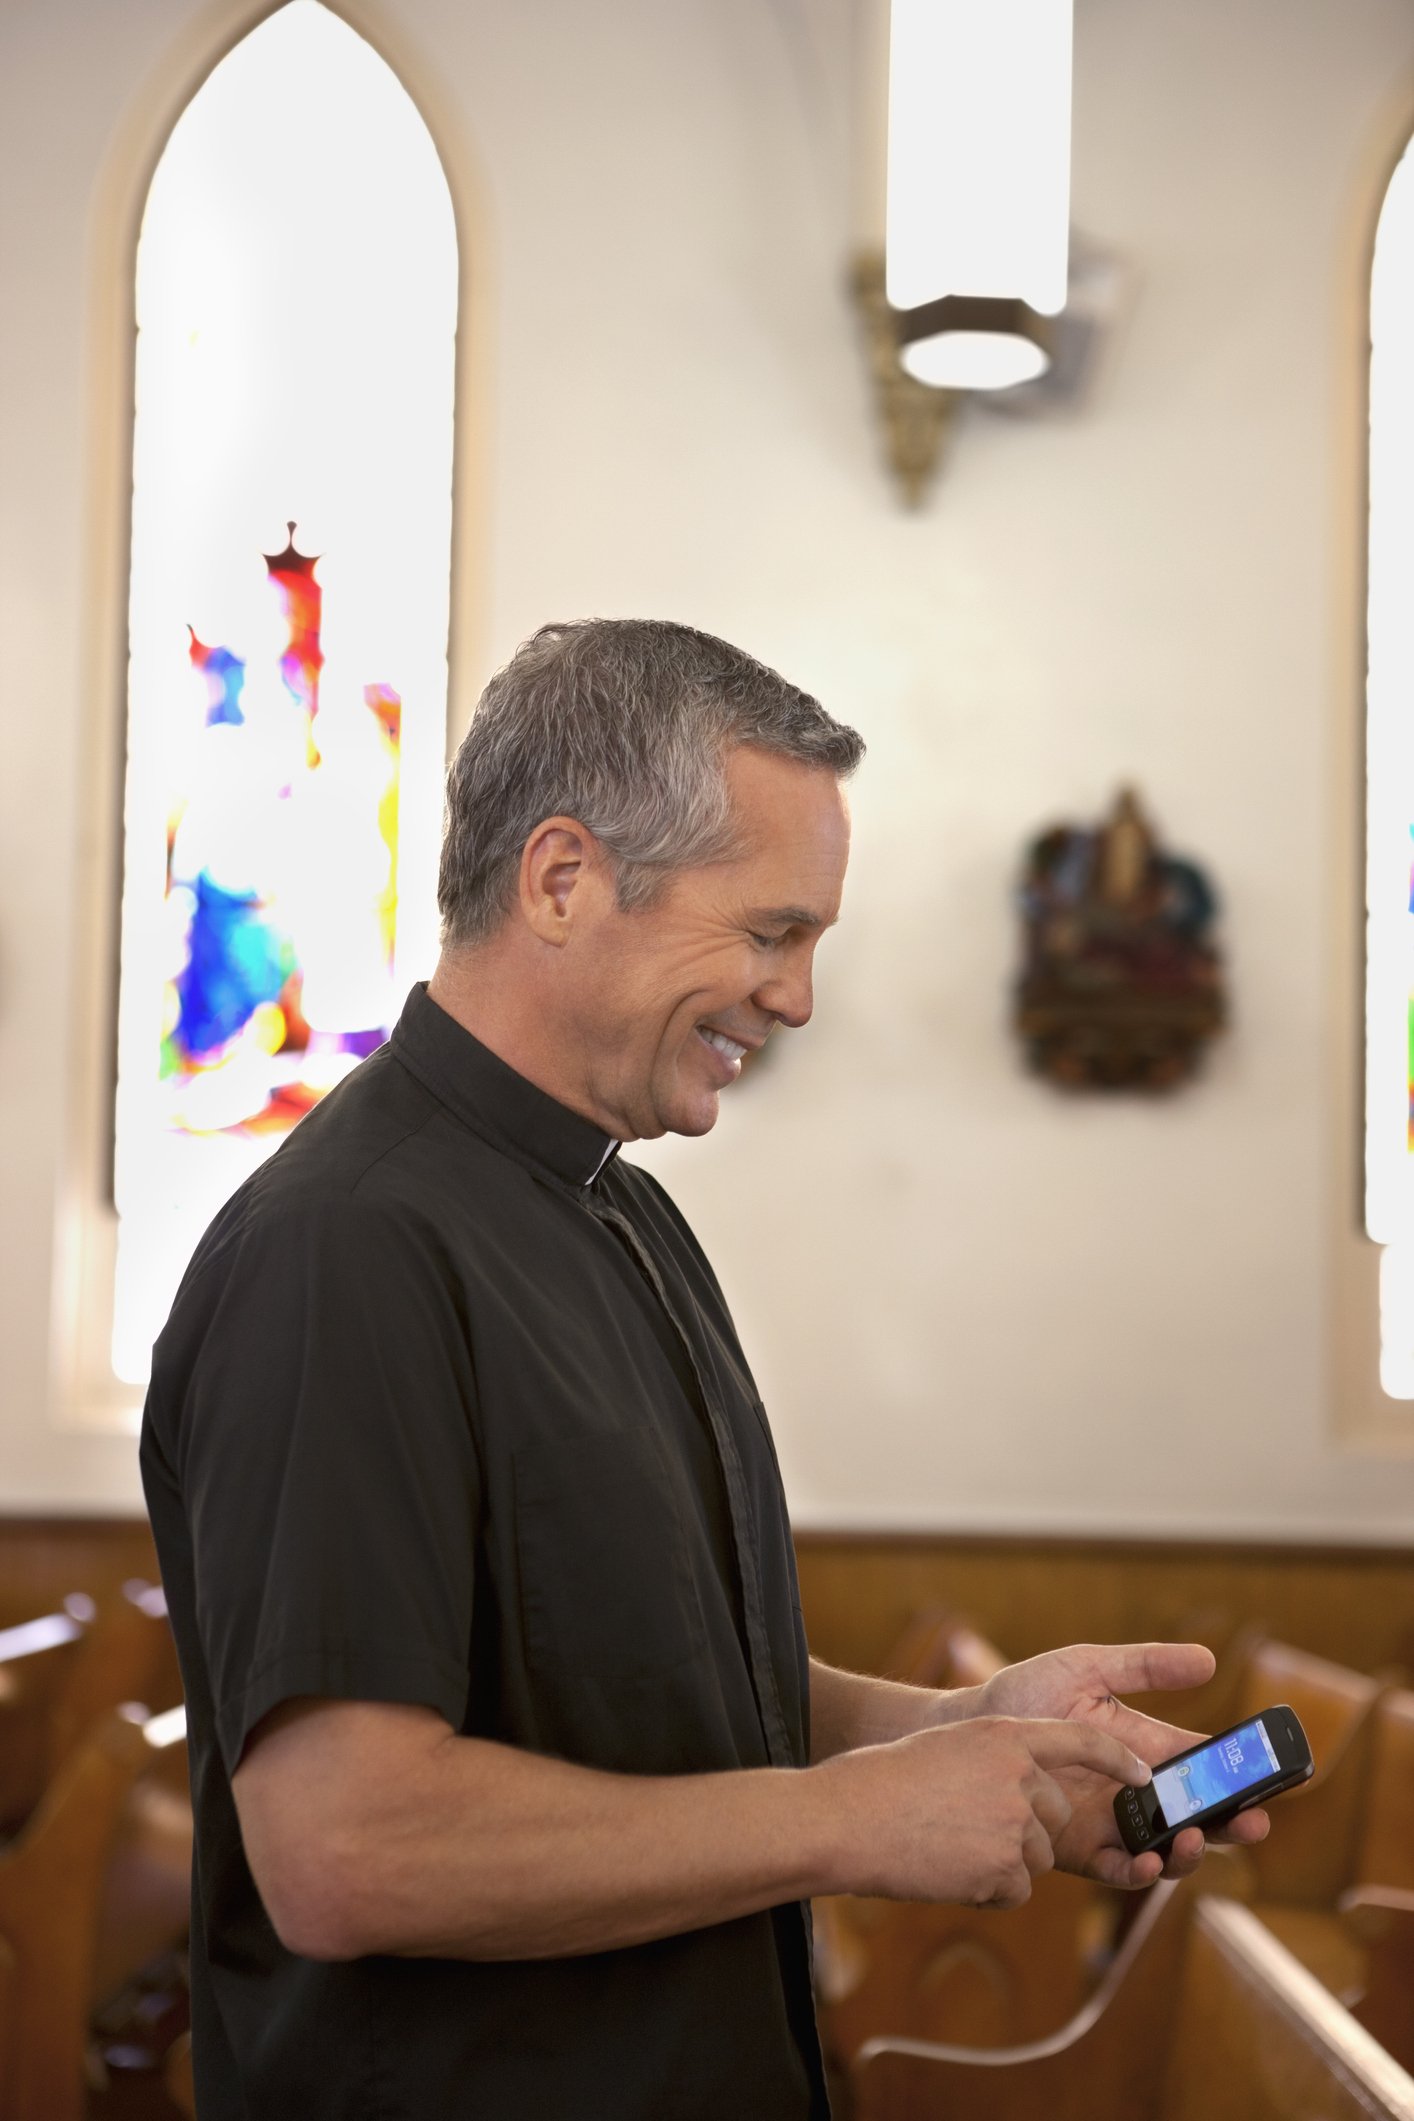 Photo of a priest using cell phone in church | Photo: Getty Images